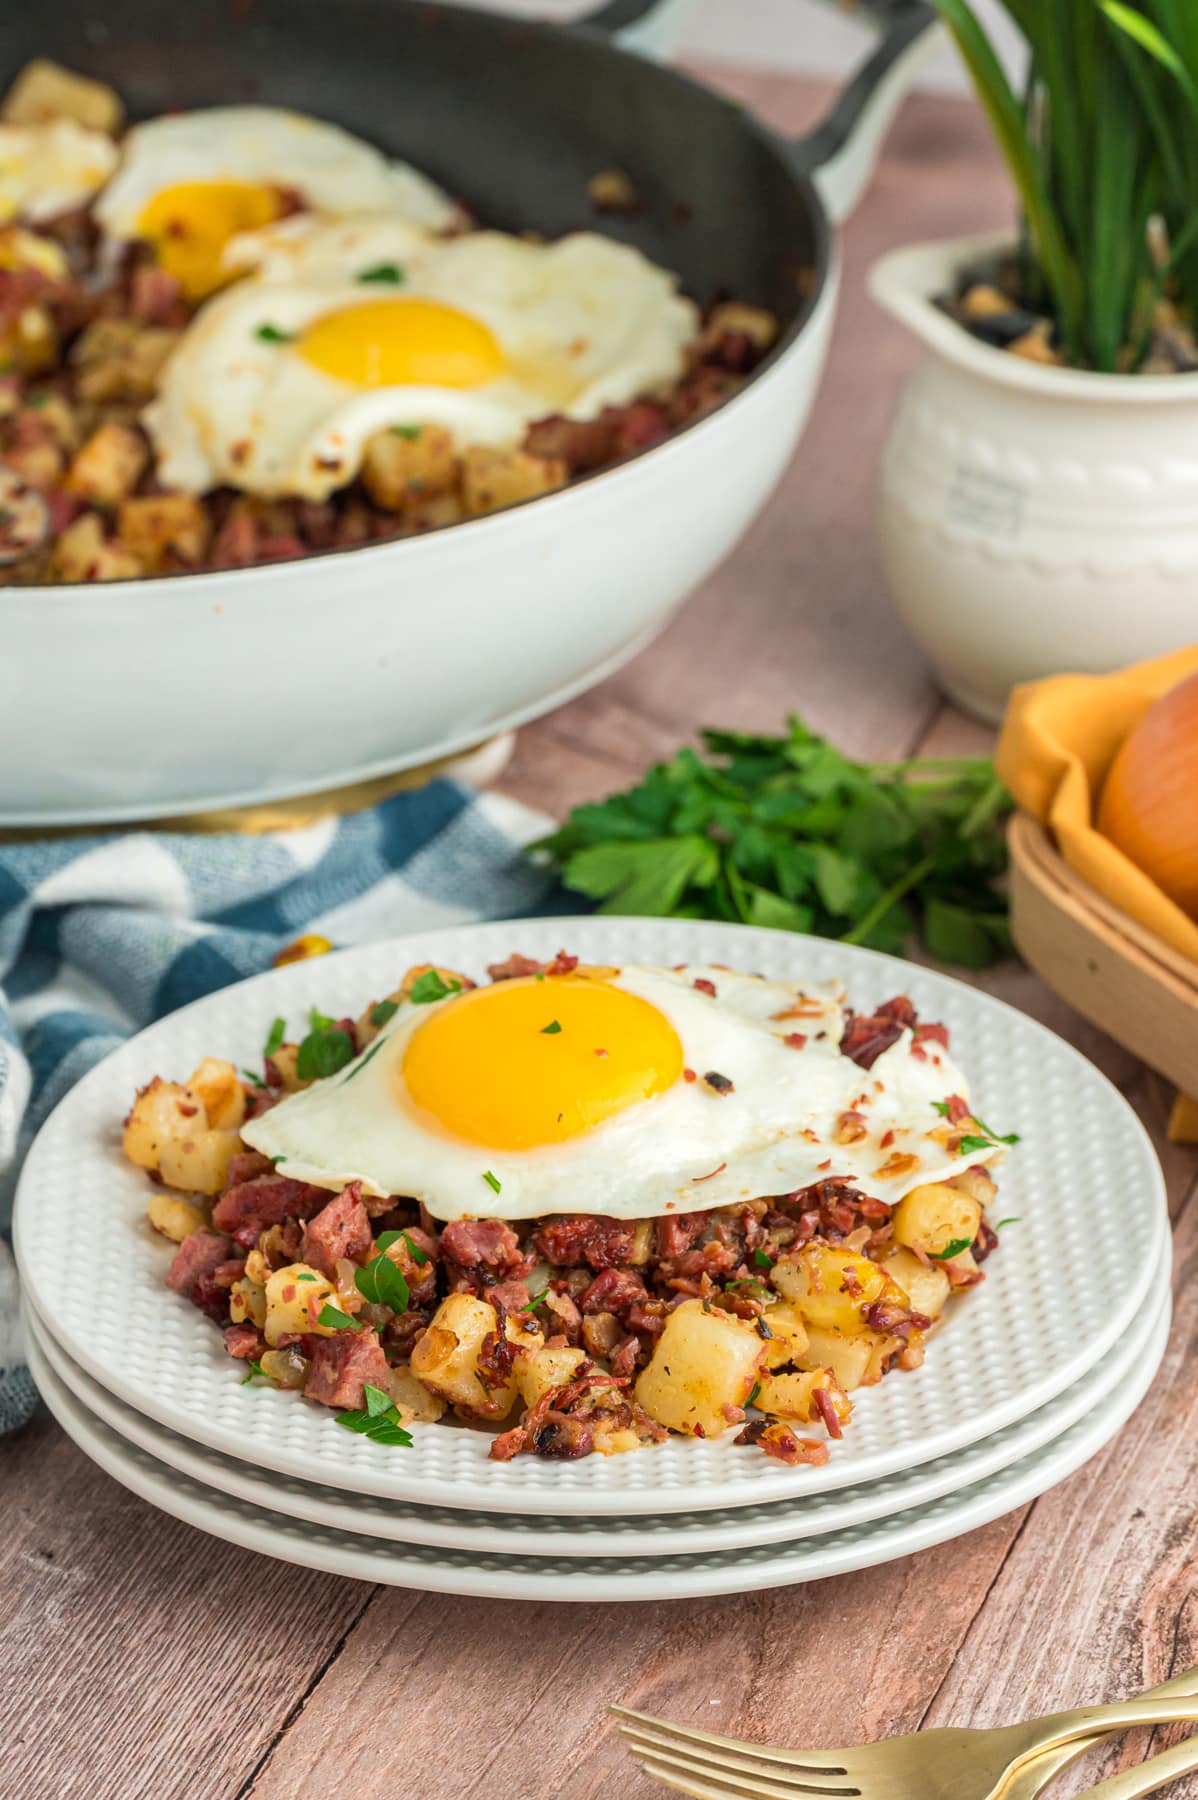 A serving of Corned Beef Hash on a white plate.